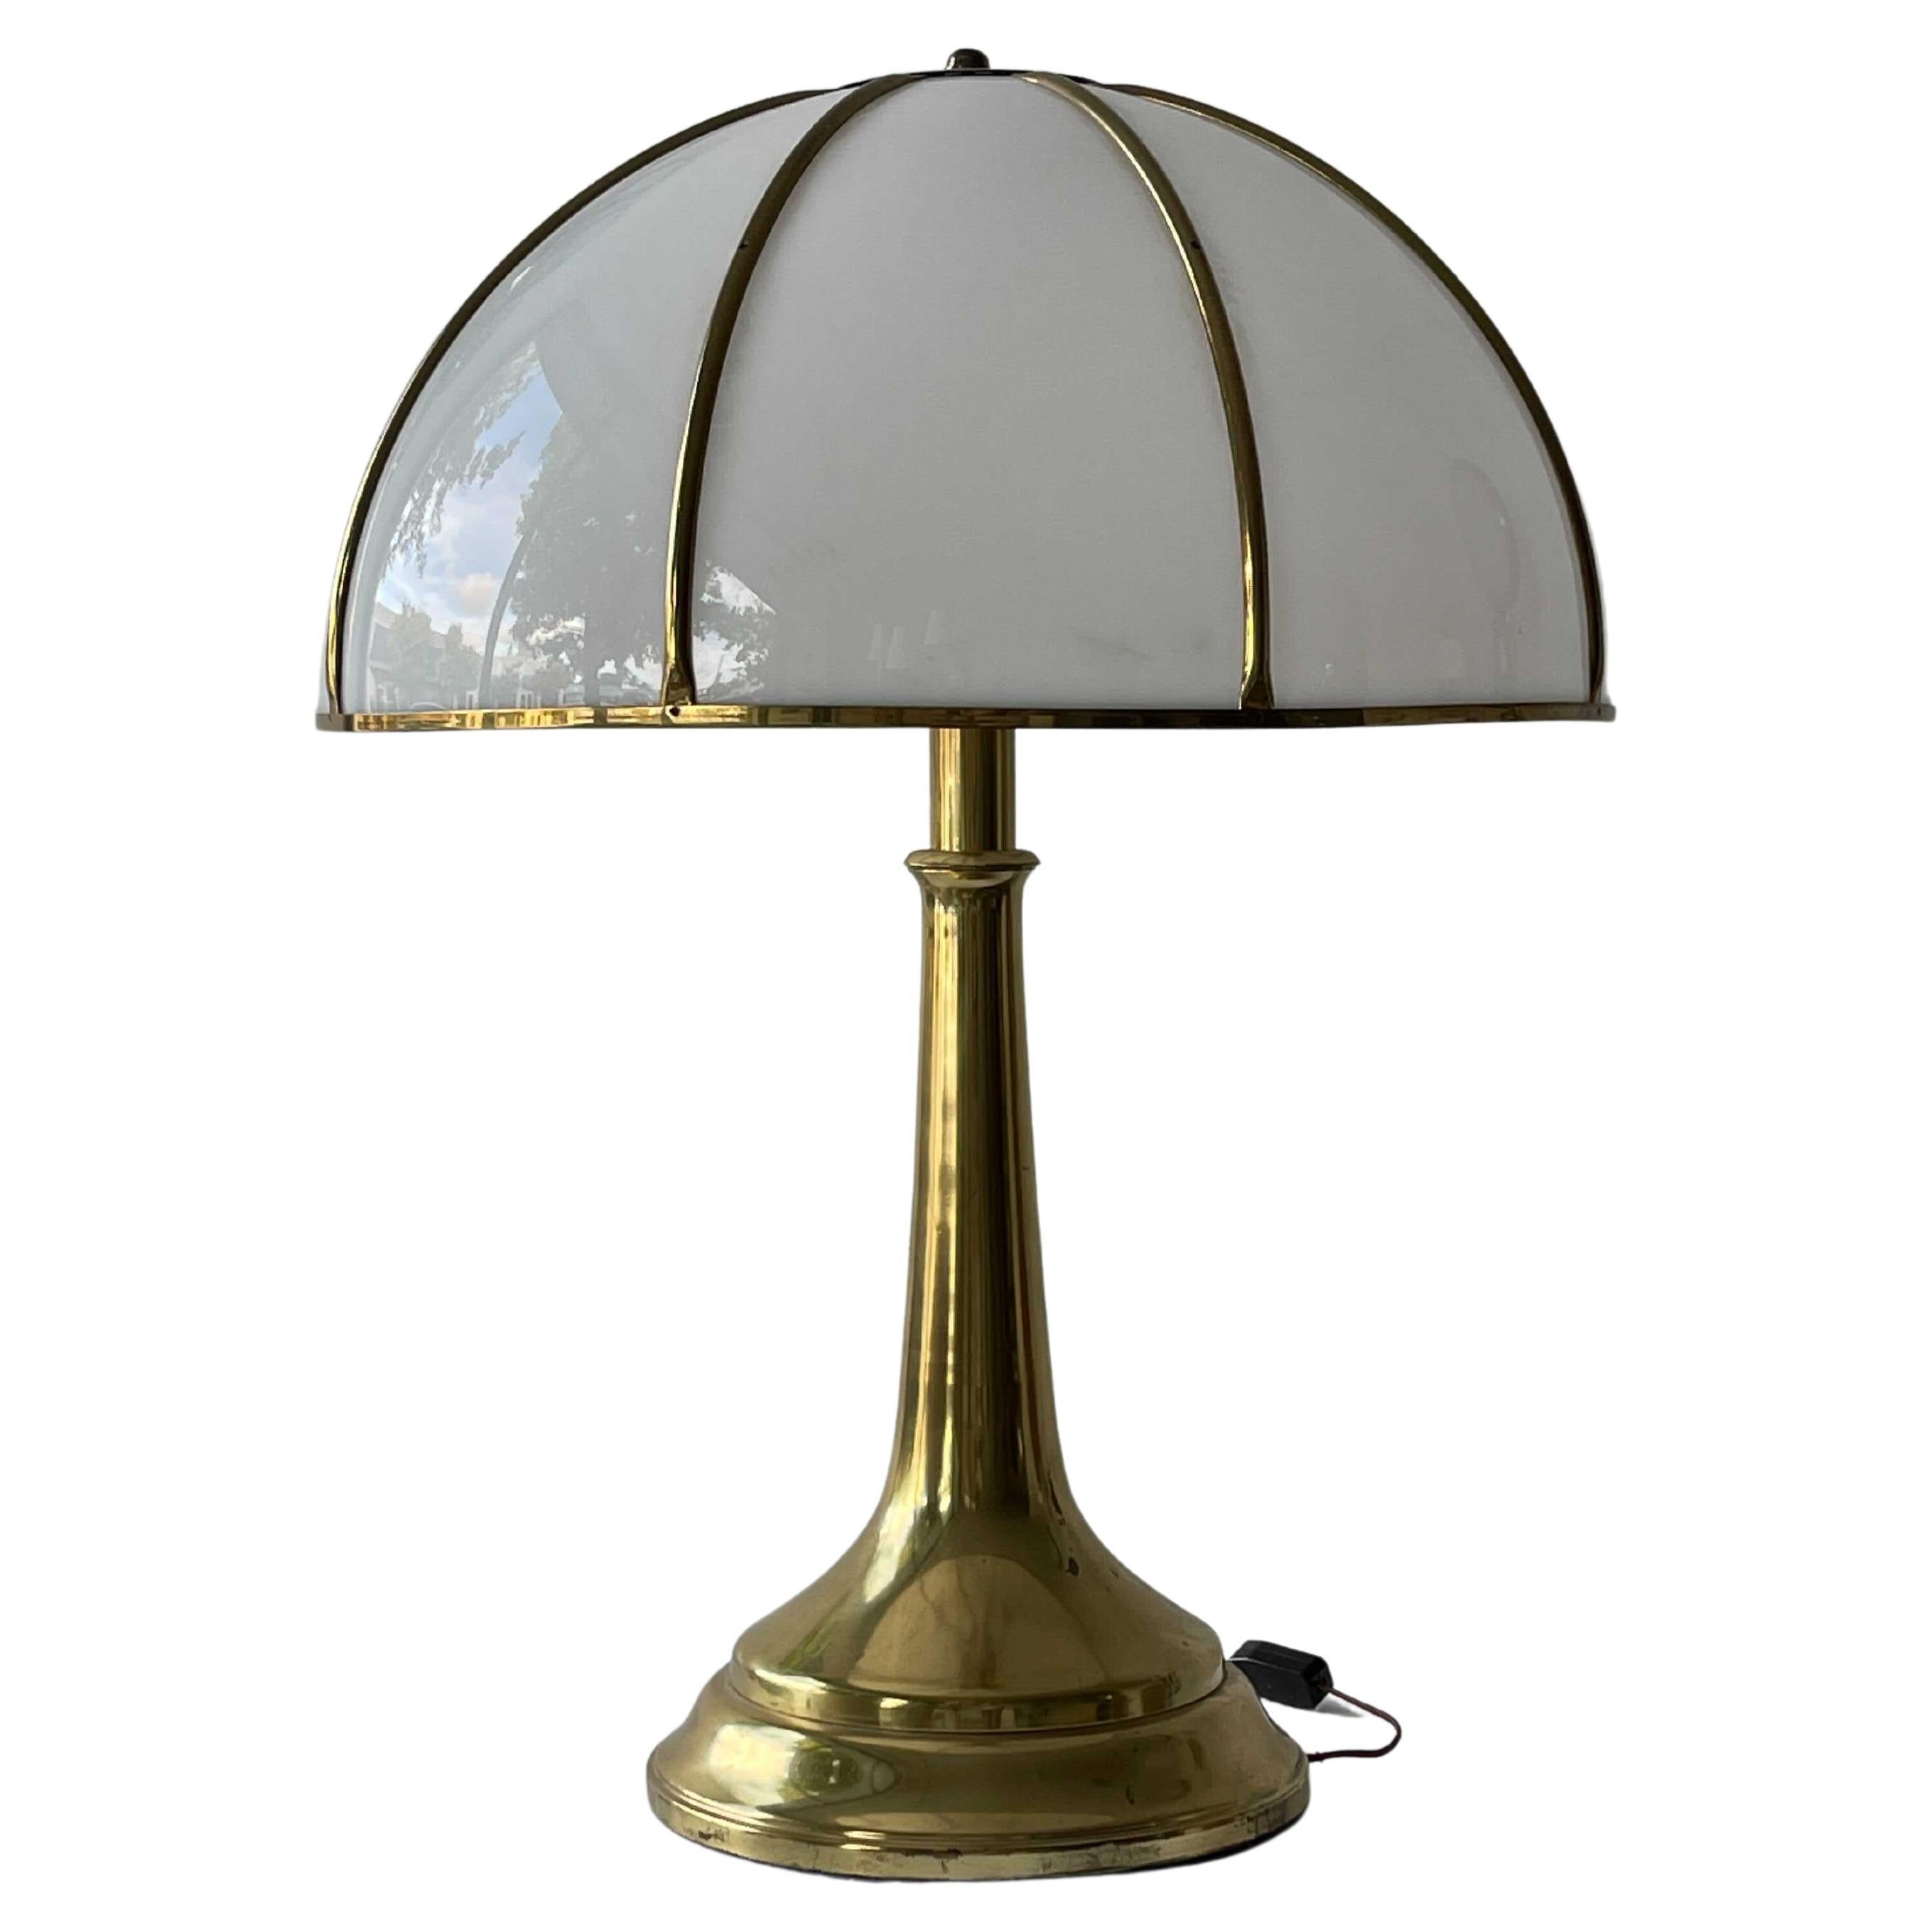 Gabriella Crespi, Very Large "Fungo" Table Lamp, Brass, Acrylic, Italy, 1970s